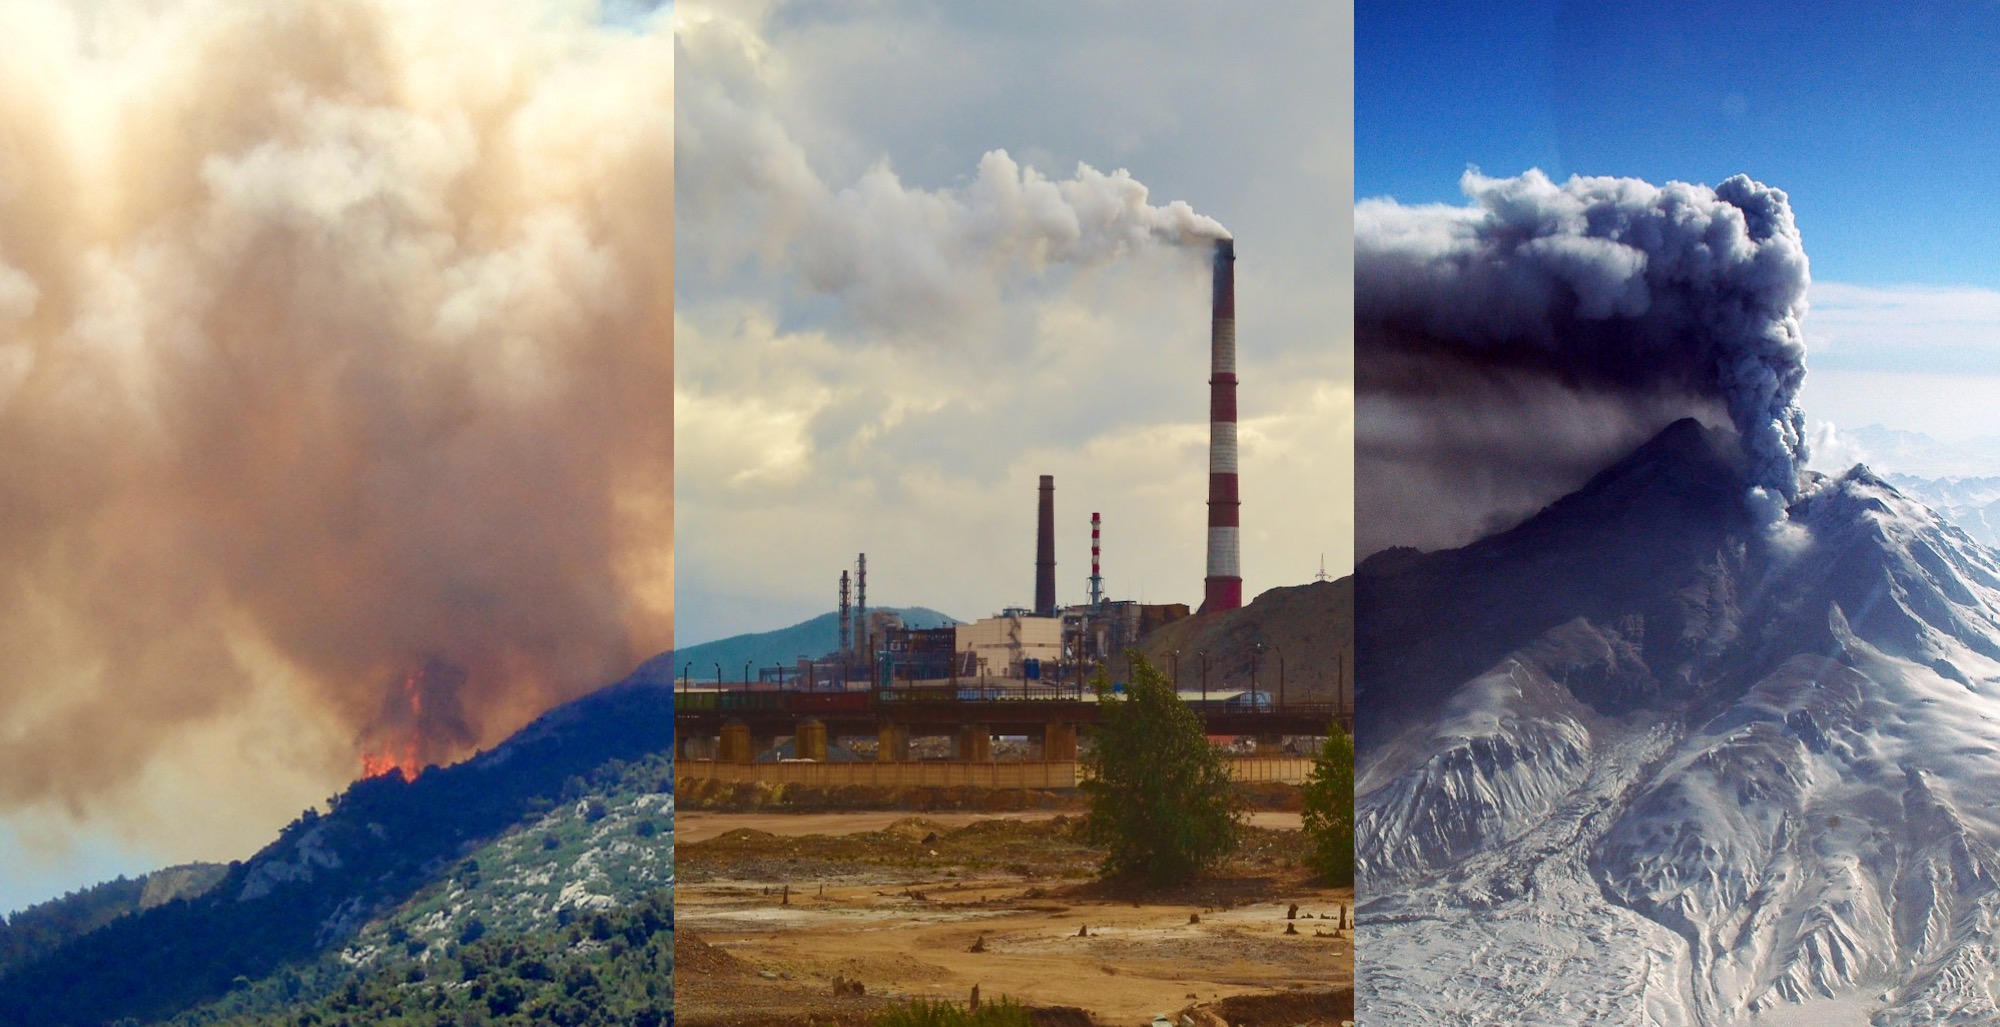 Aerosols are small particles or droplets that float in the air. They are emitted by both natural events and human activities. Some aerosols cool the climate, and others have a warming effect. Image credits, left to right: Saiho/Pixabay, olegkamenskij20120/Pixabay, USGS. Image design: NASA/JPL-Caltech